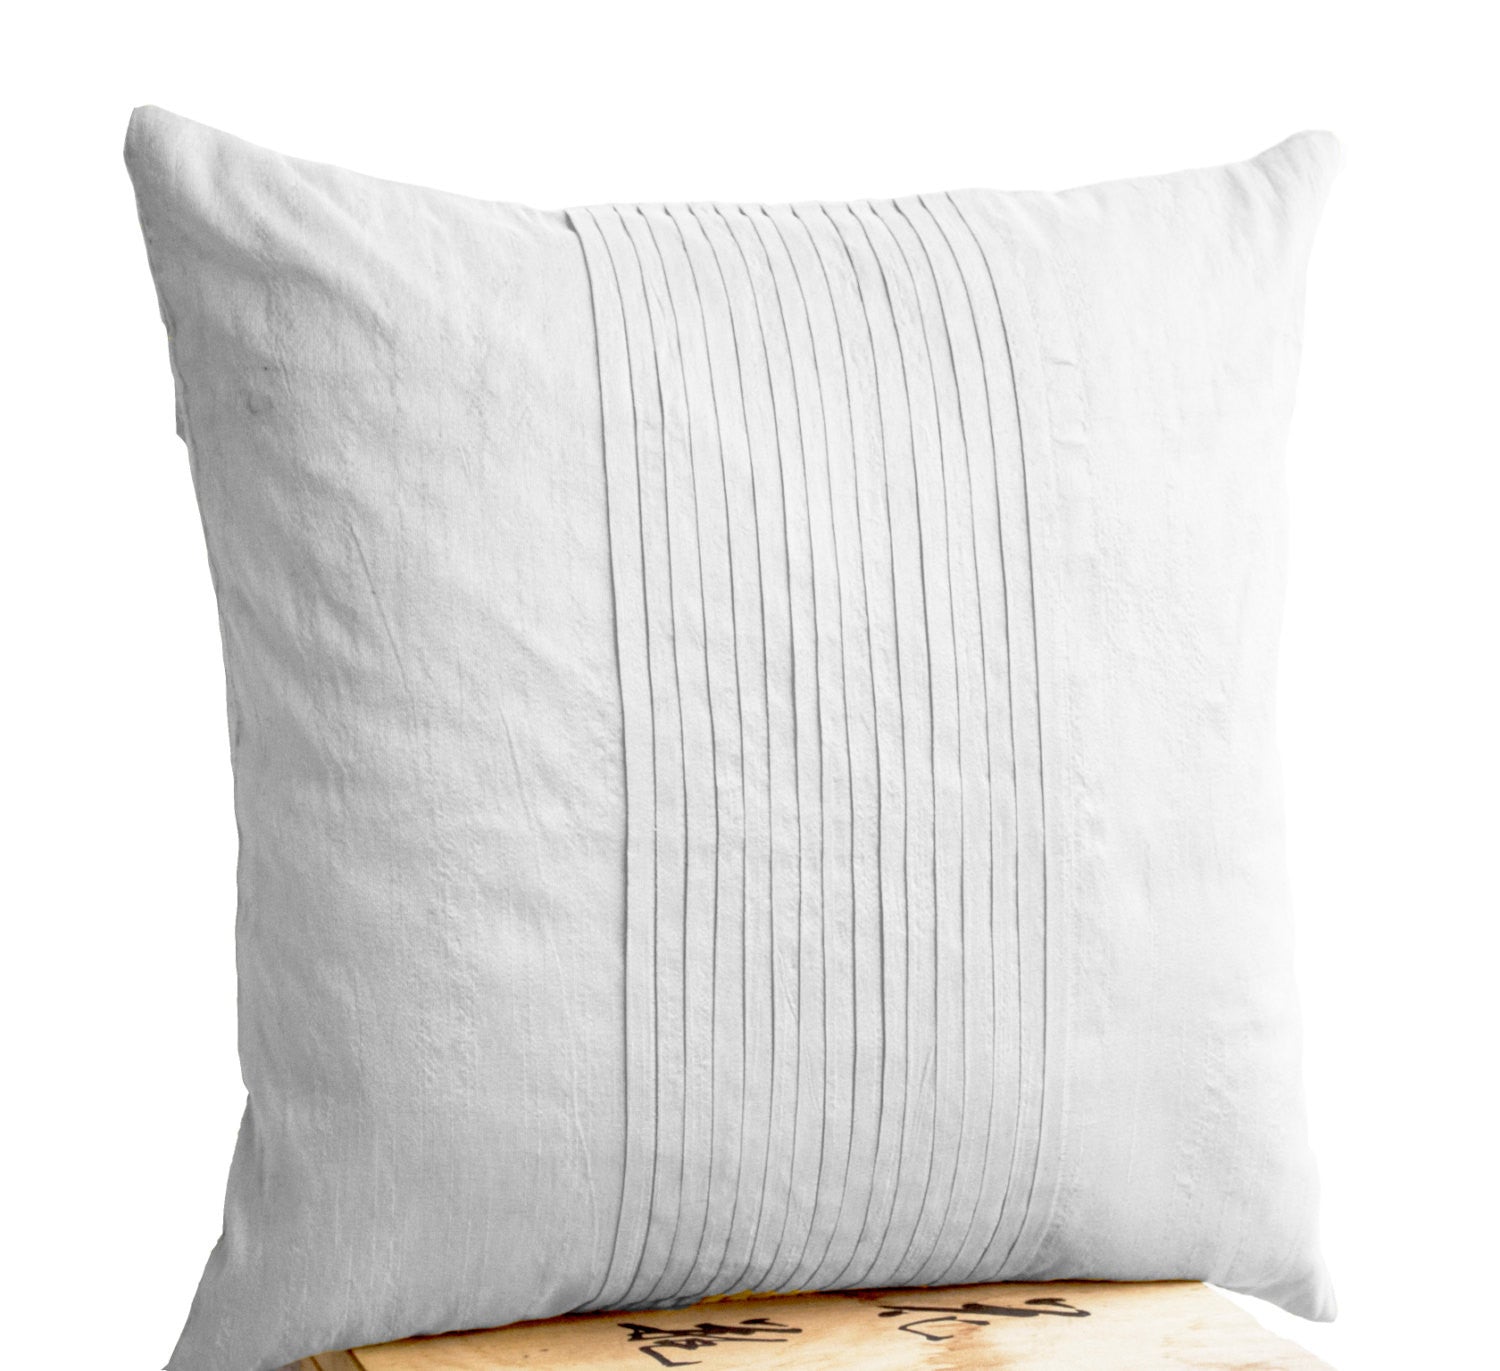 Ripple Pillow Sham  Shop Decorative Linens and More From The